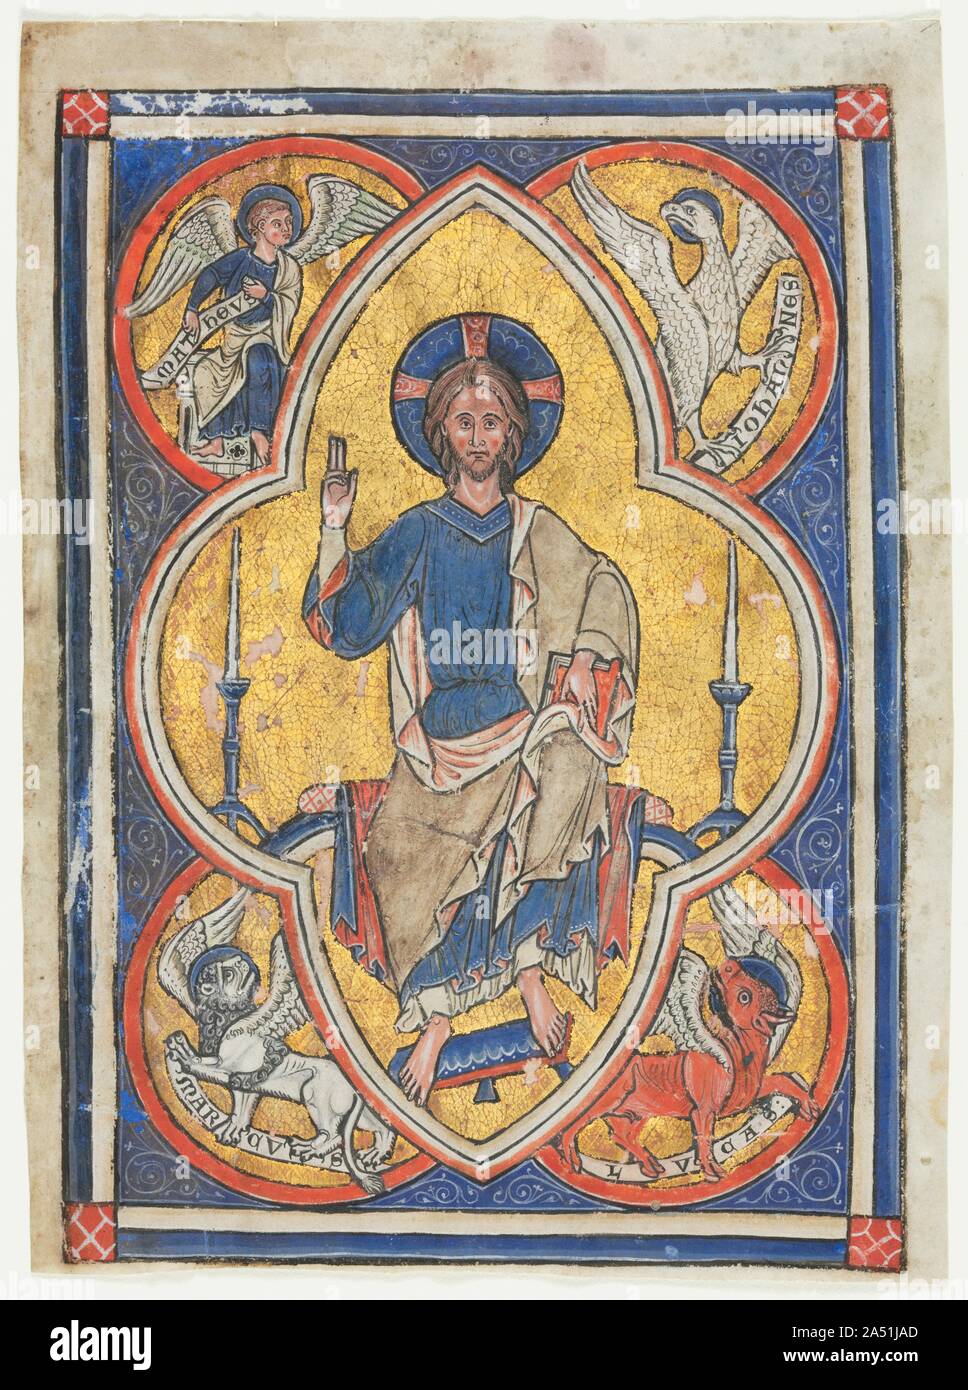 Miniature Excised from a Psalter: Christ in Majesty with Symbols of the Four Evangelists, c. 1235. Christ is seated within a cusped frame representing his aura. He is surrounded by the four &quot;living creatures&quot;---the gospel writers---as envisioned by Saint John in his Apocalypse: a winged man (St. Matthew), a lion (St. Mark), an ox (St. Luke), and an eagle (St. John). Stock Photo